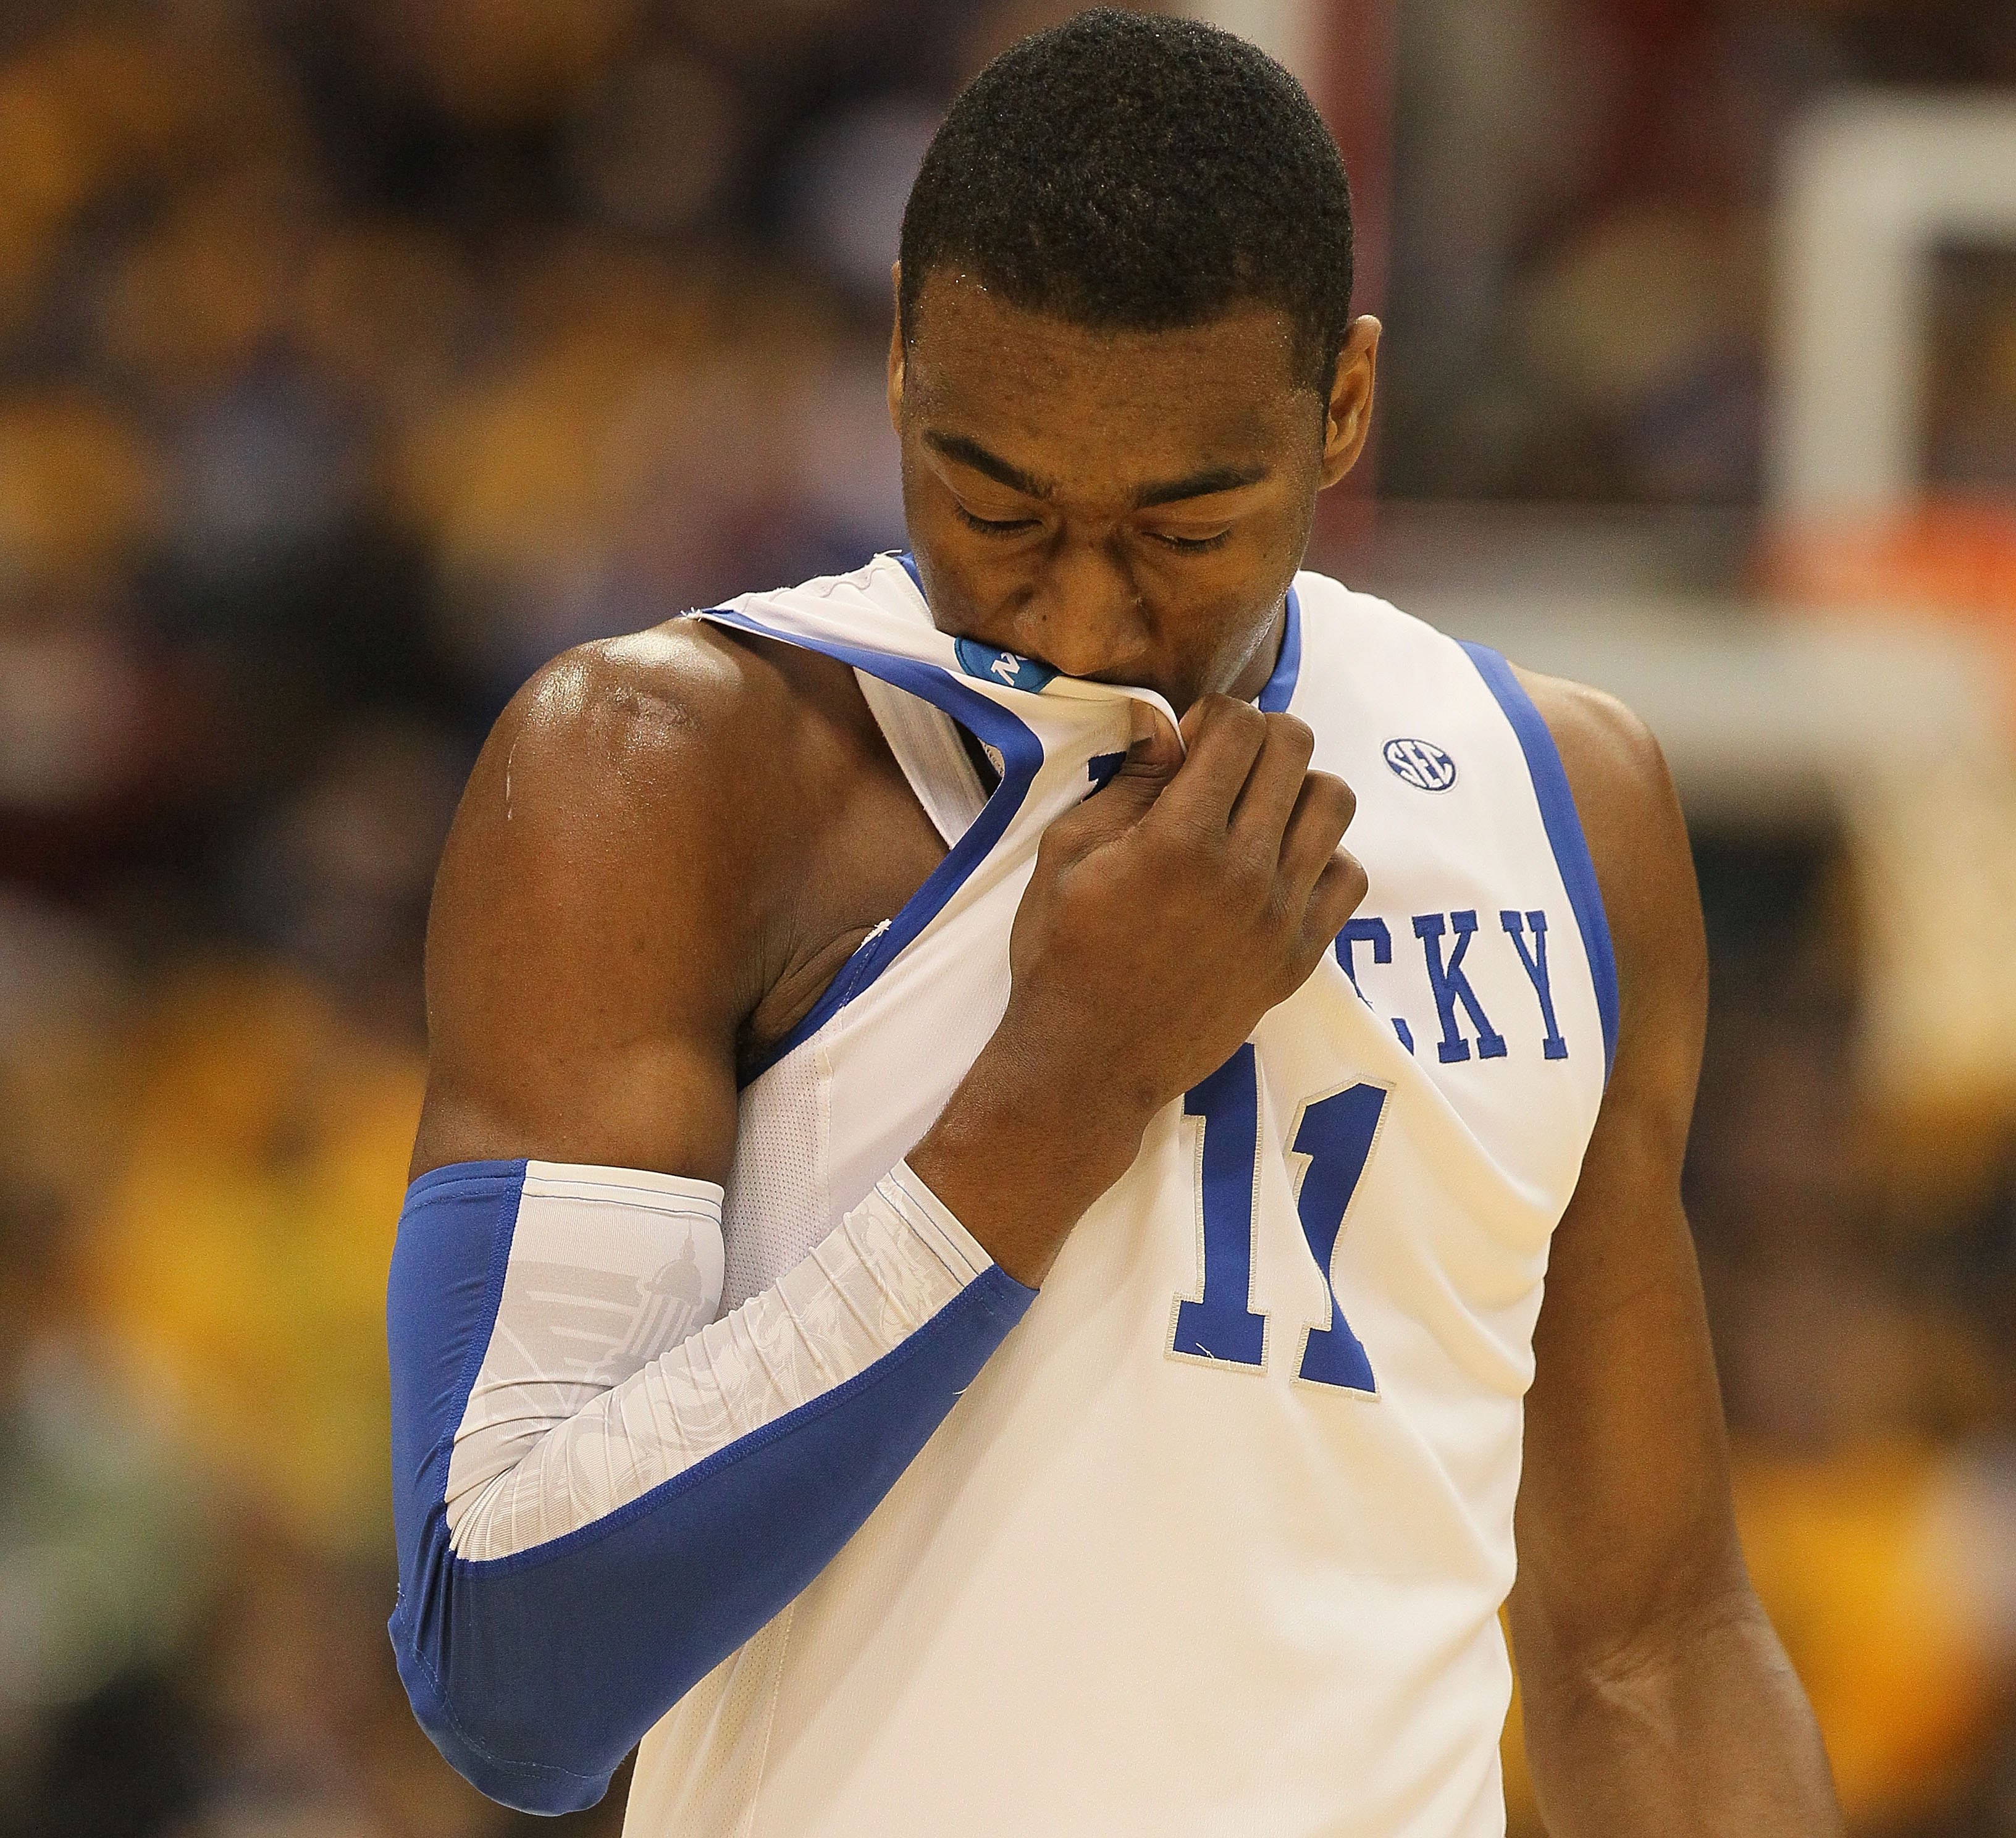 SYRACUSE, NY - MARCH 27:  John Wall #11 of the Kentucky Wildcats wipes his face with his jersey against the West Virginia Mountaineers during the east regional final of the 2010 NCAA men's basketball tournament at the Carrier Dome on March 27, 2010 in Syr